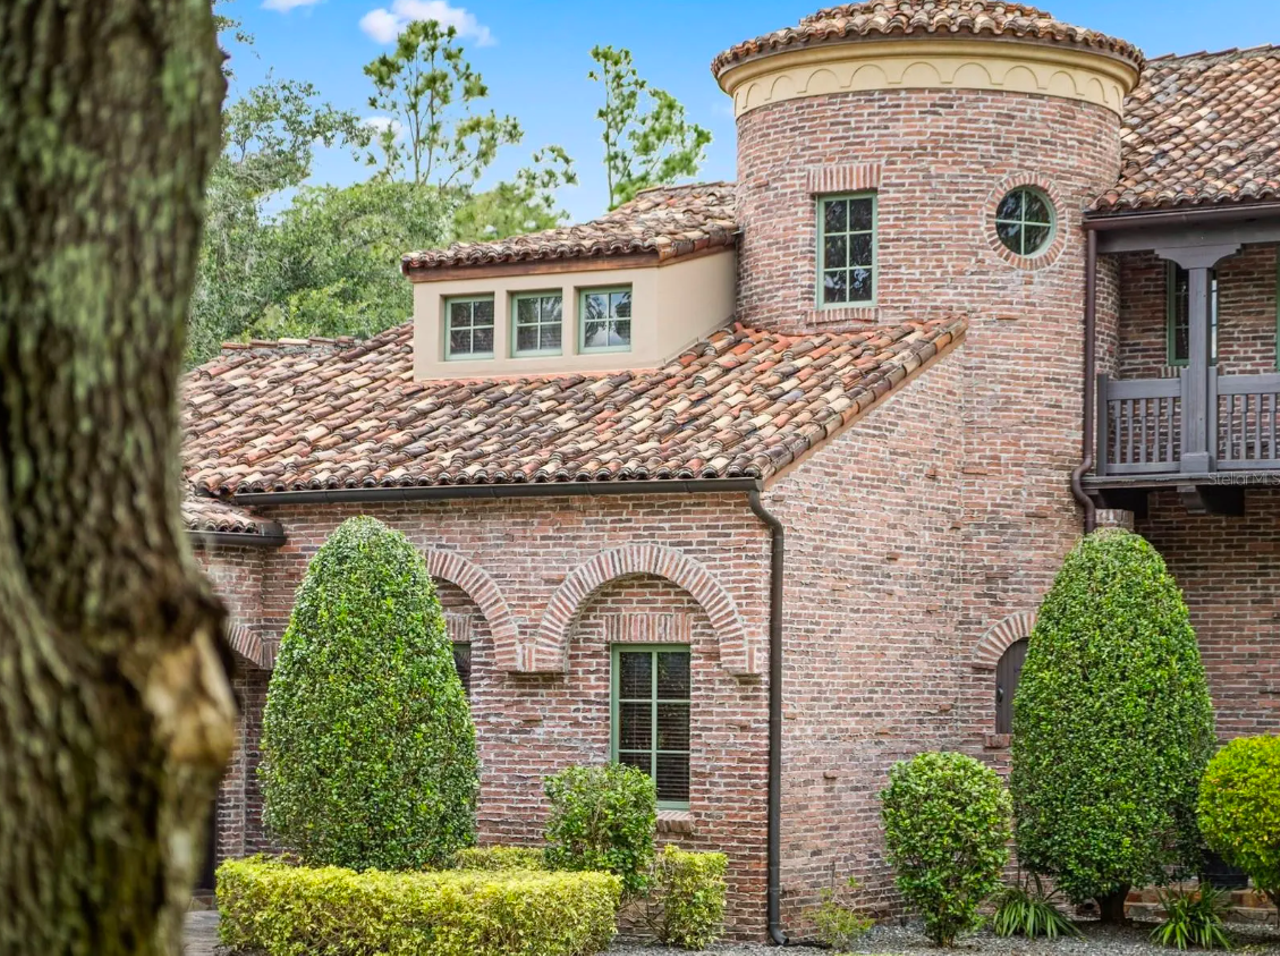 This Orlando home for sale looks like a fairytale castle inside and out